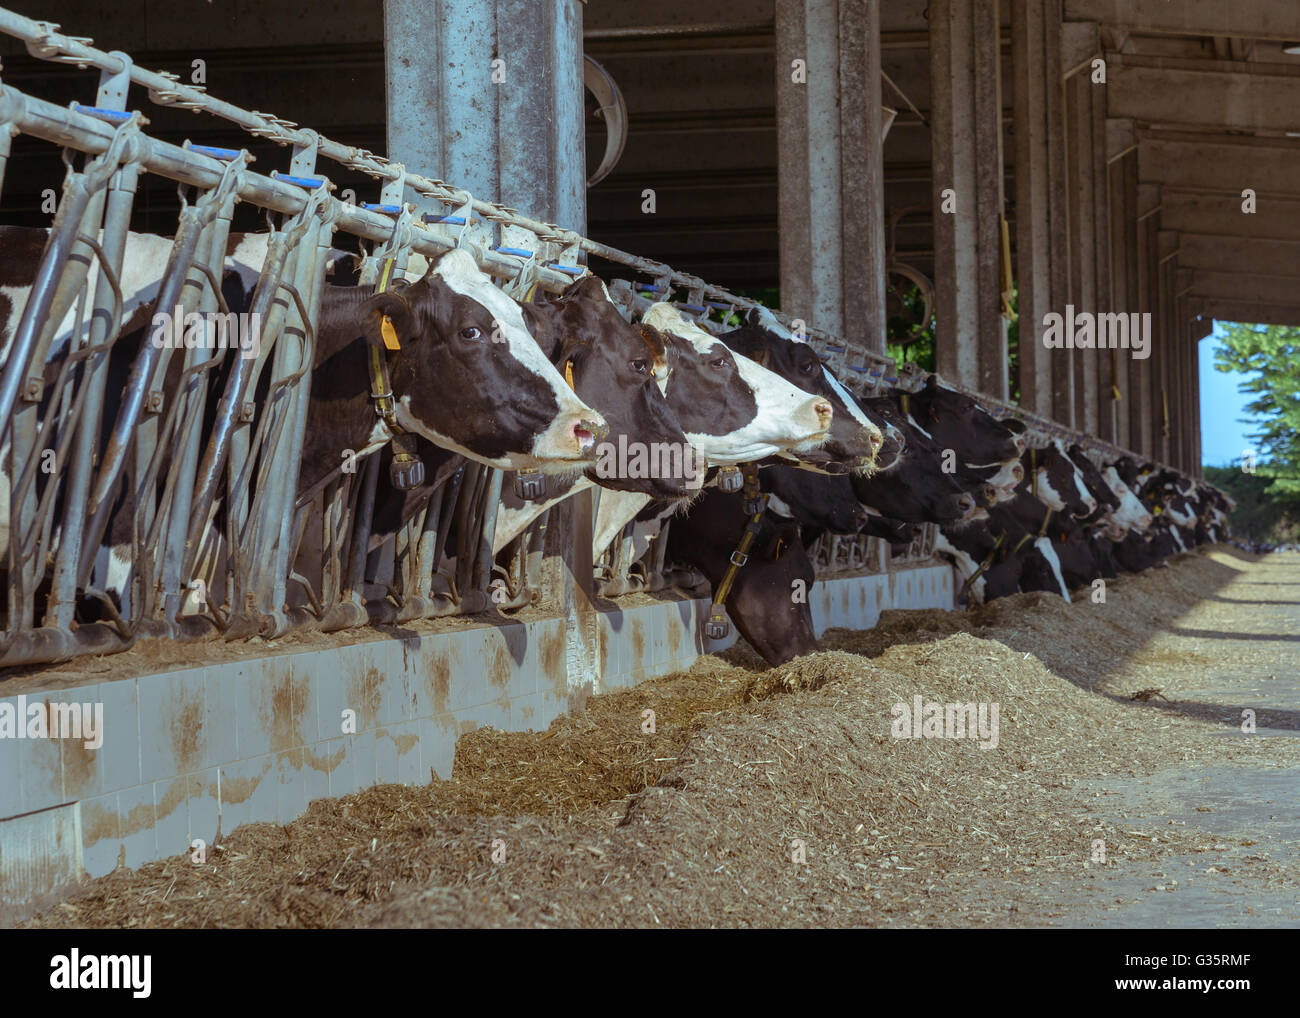 Farm cows in a row while caged, ready for slaughterhouse Stock Photo